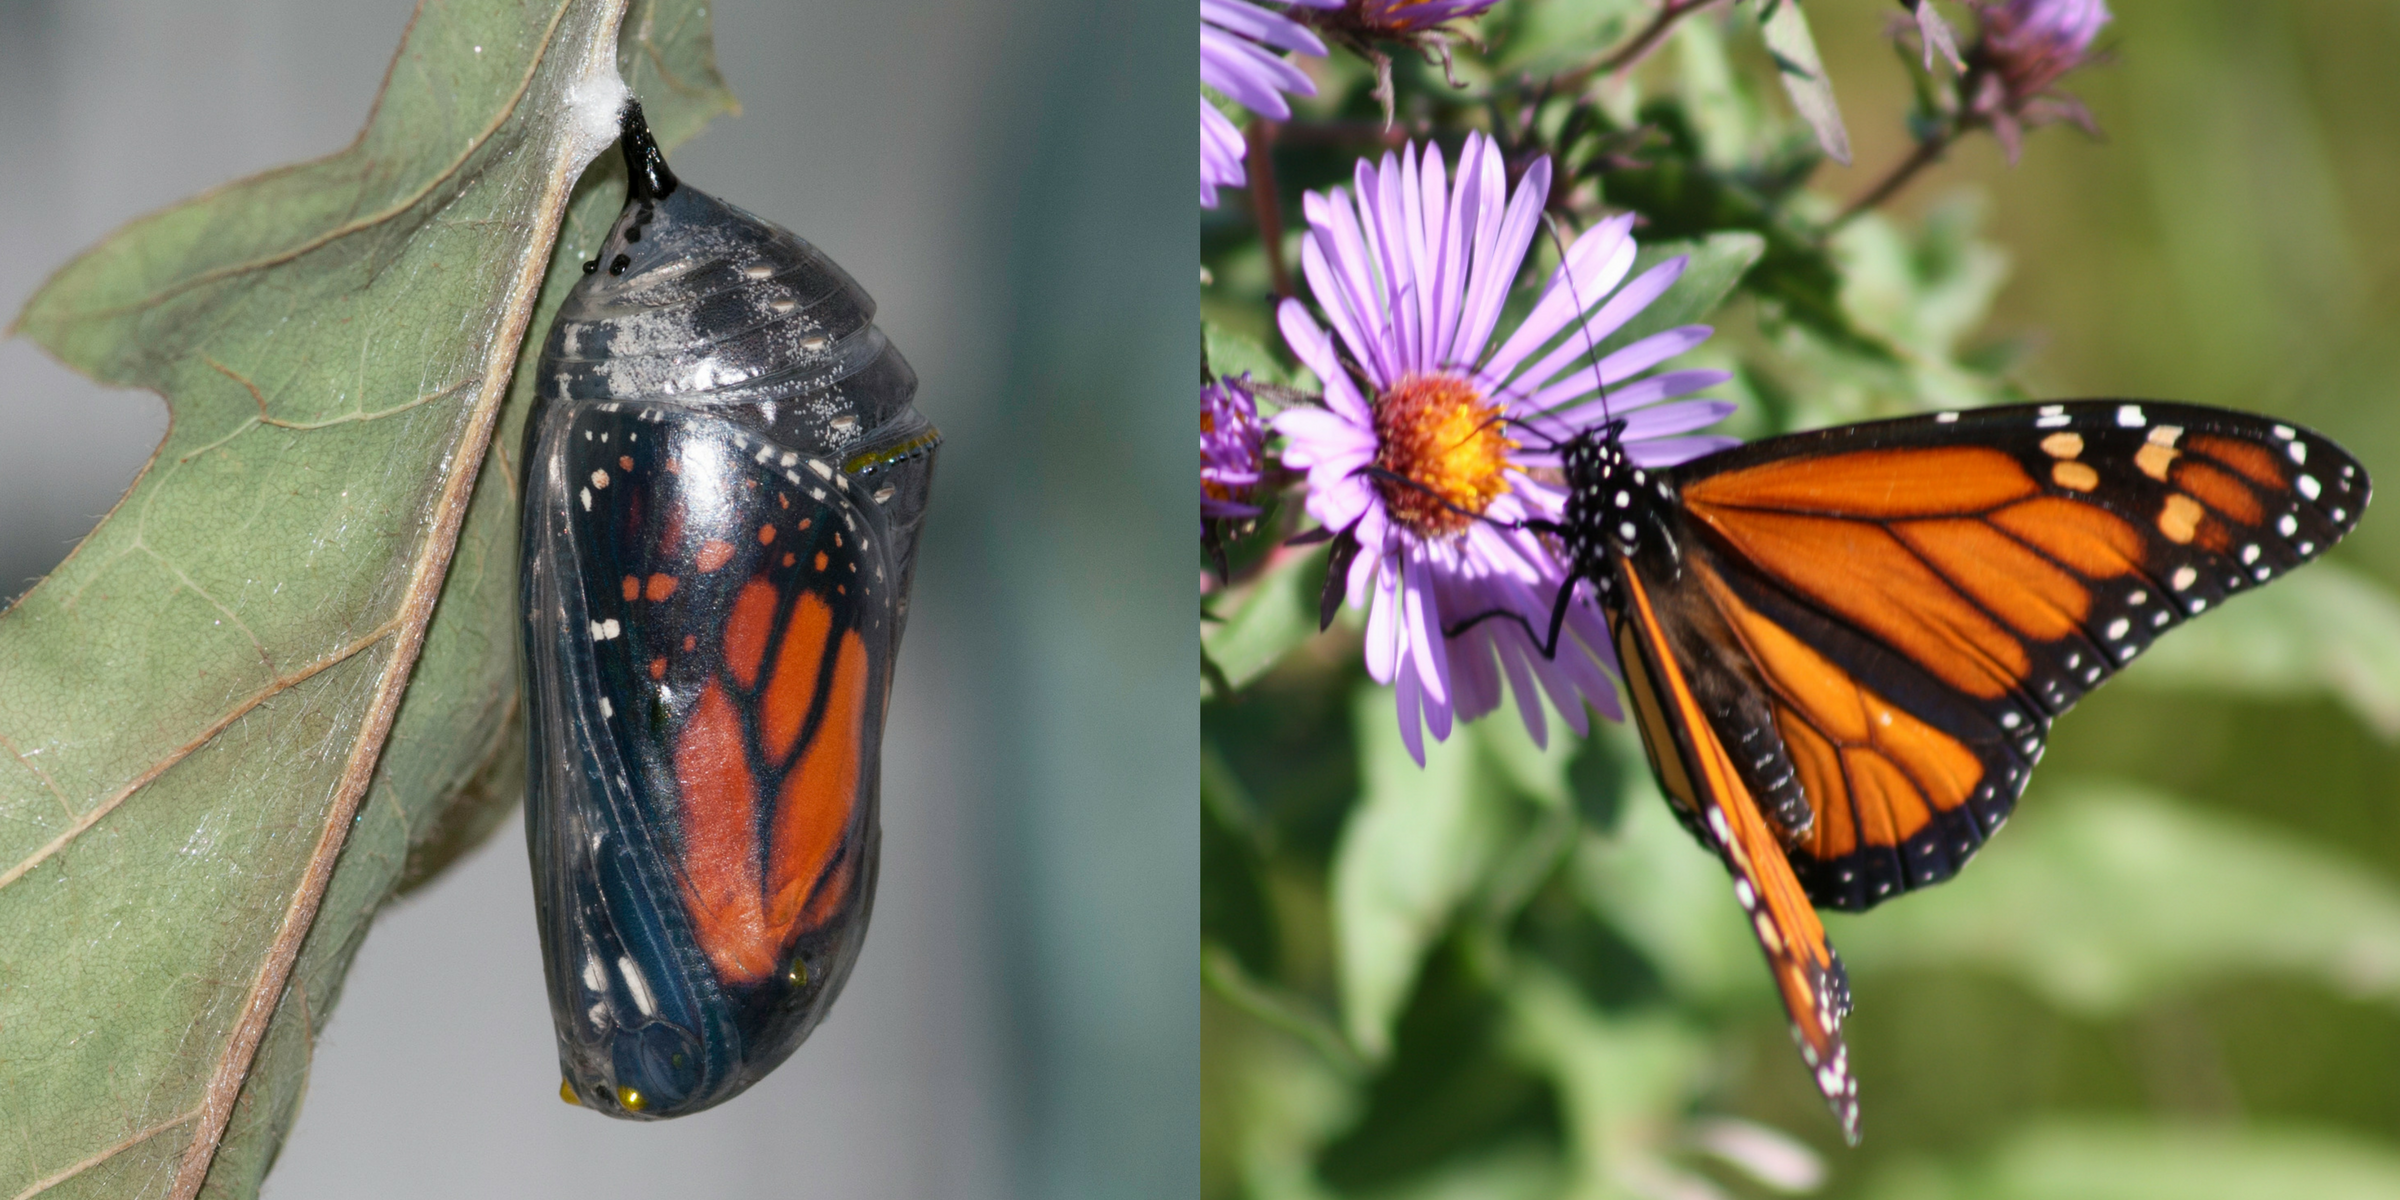 A butterfly cocoon, and an orange and black butterfly on a purple flower.